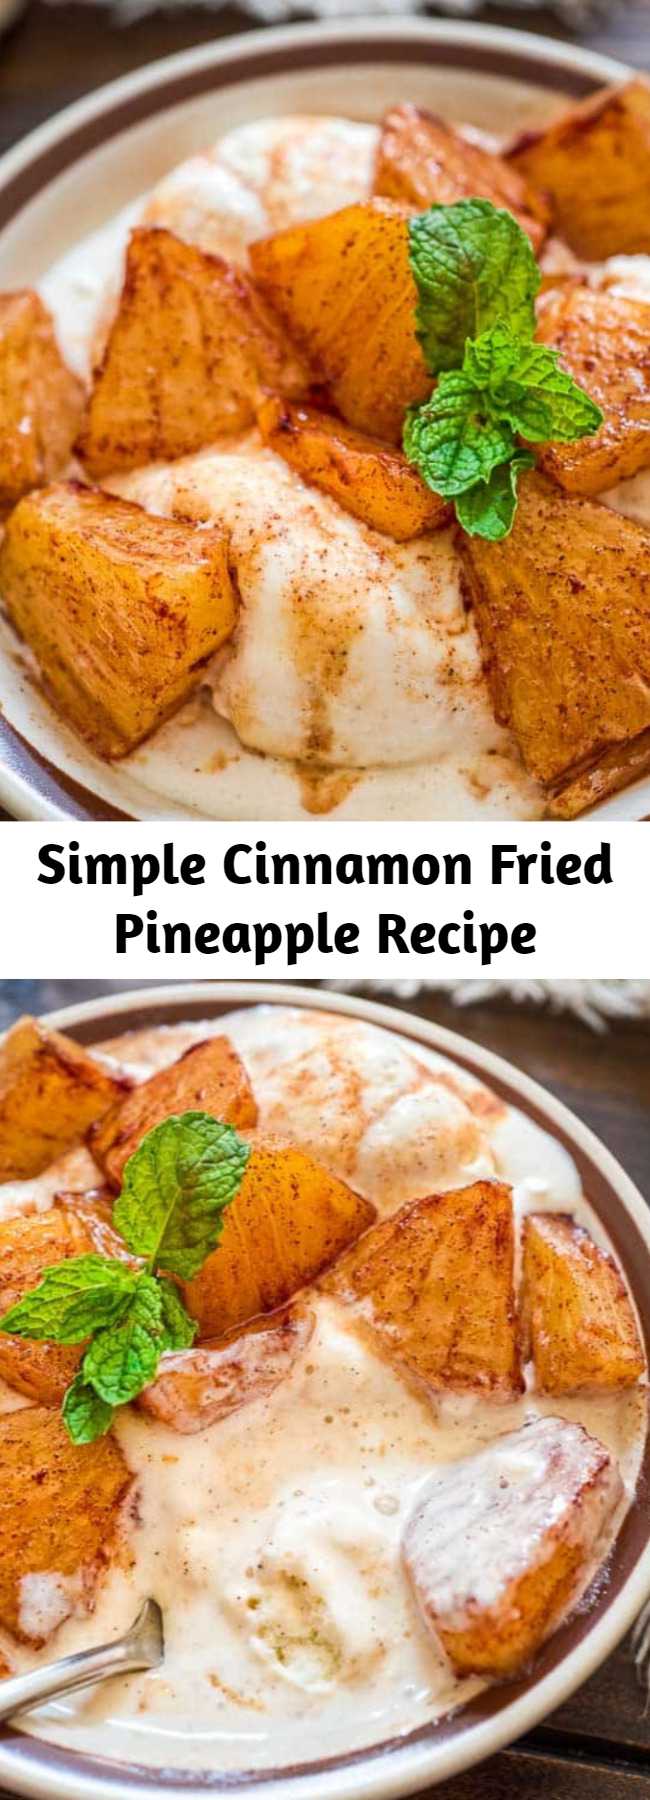 Simple Cinnamon Fried Pineapple Recipe - Try this simple, yet scrumptious Cinnamon Fried Pineapple. It requires just a few common ingredients and only 10 minutes of your time. #pineapple #cinnamon #dessert #icecream